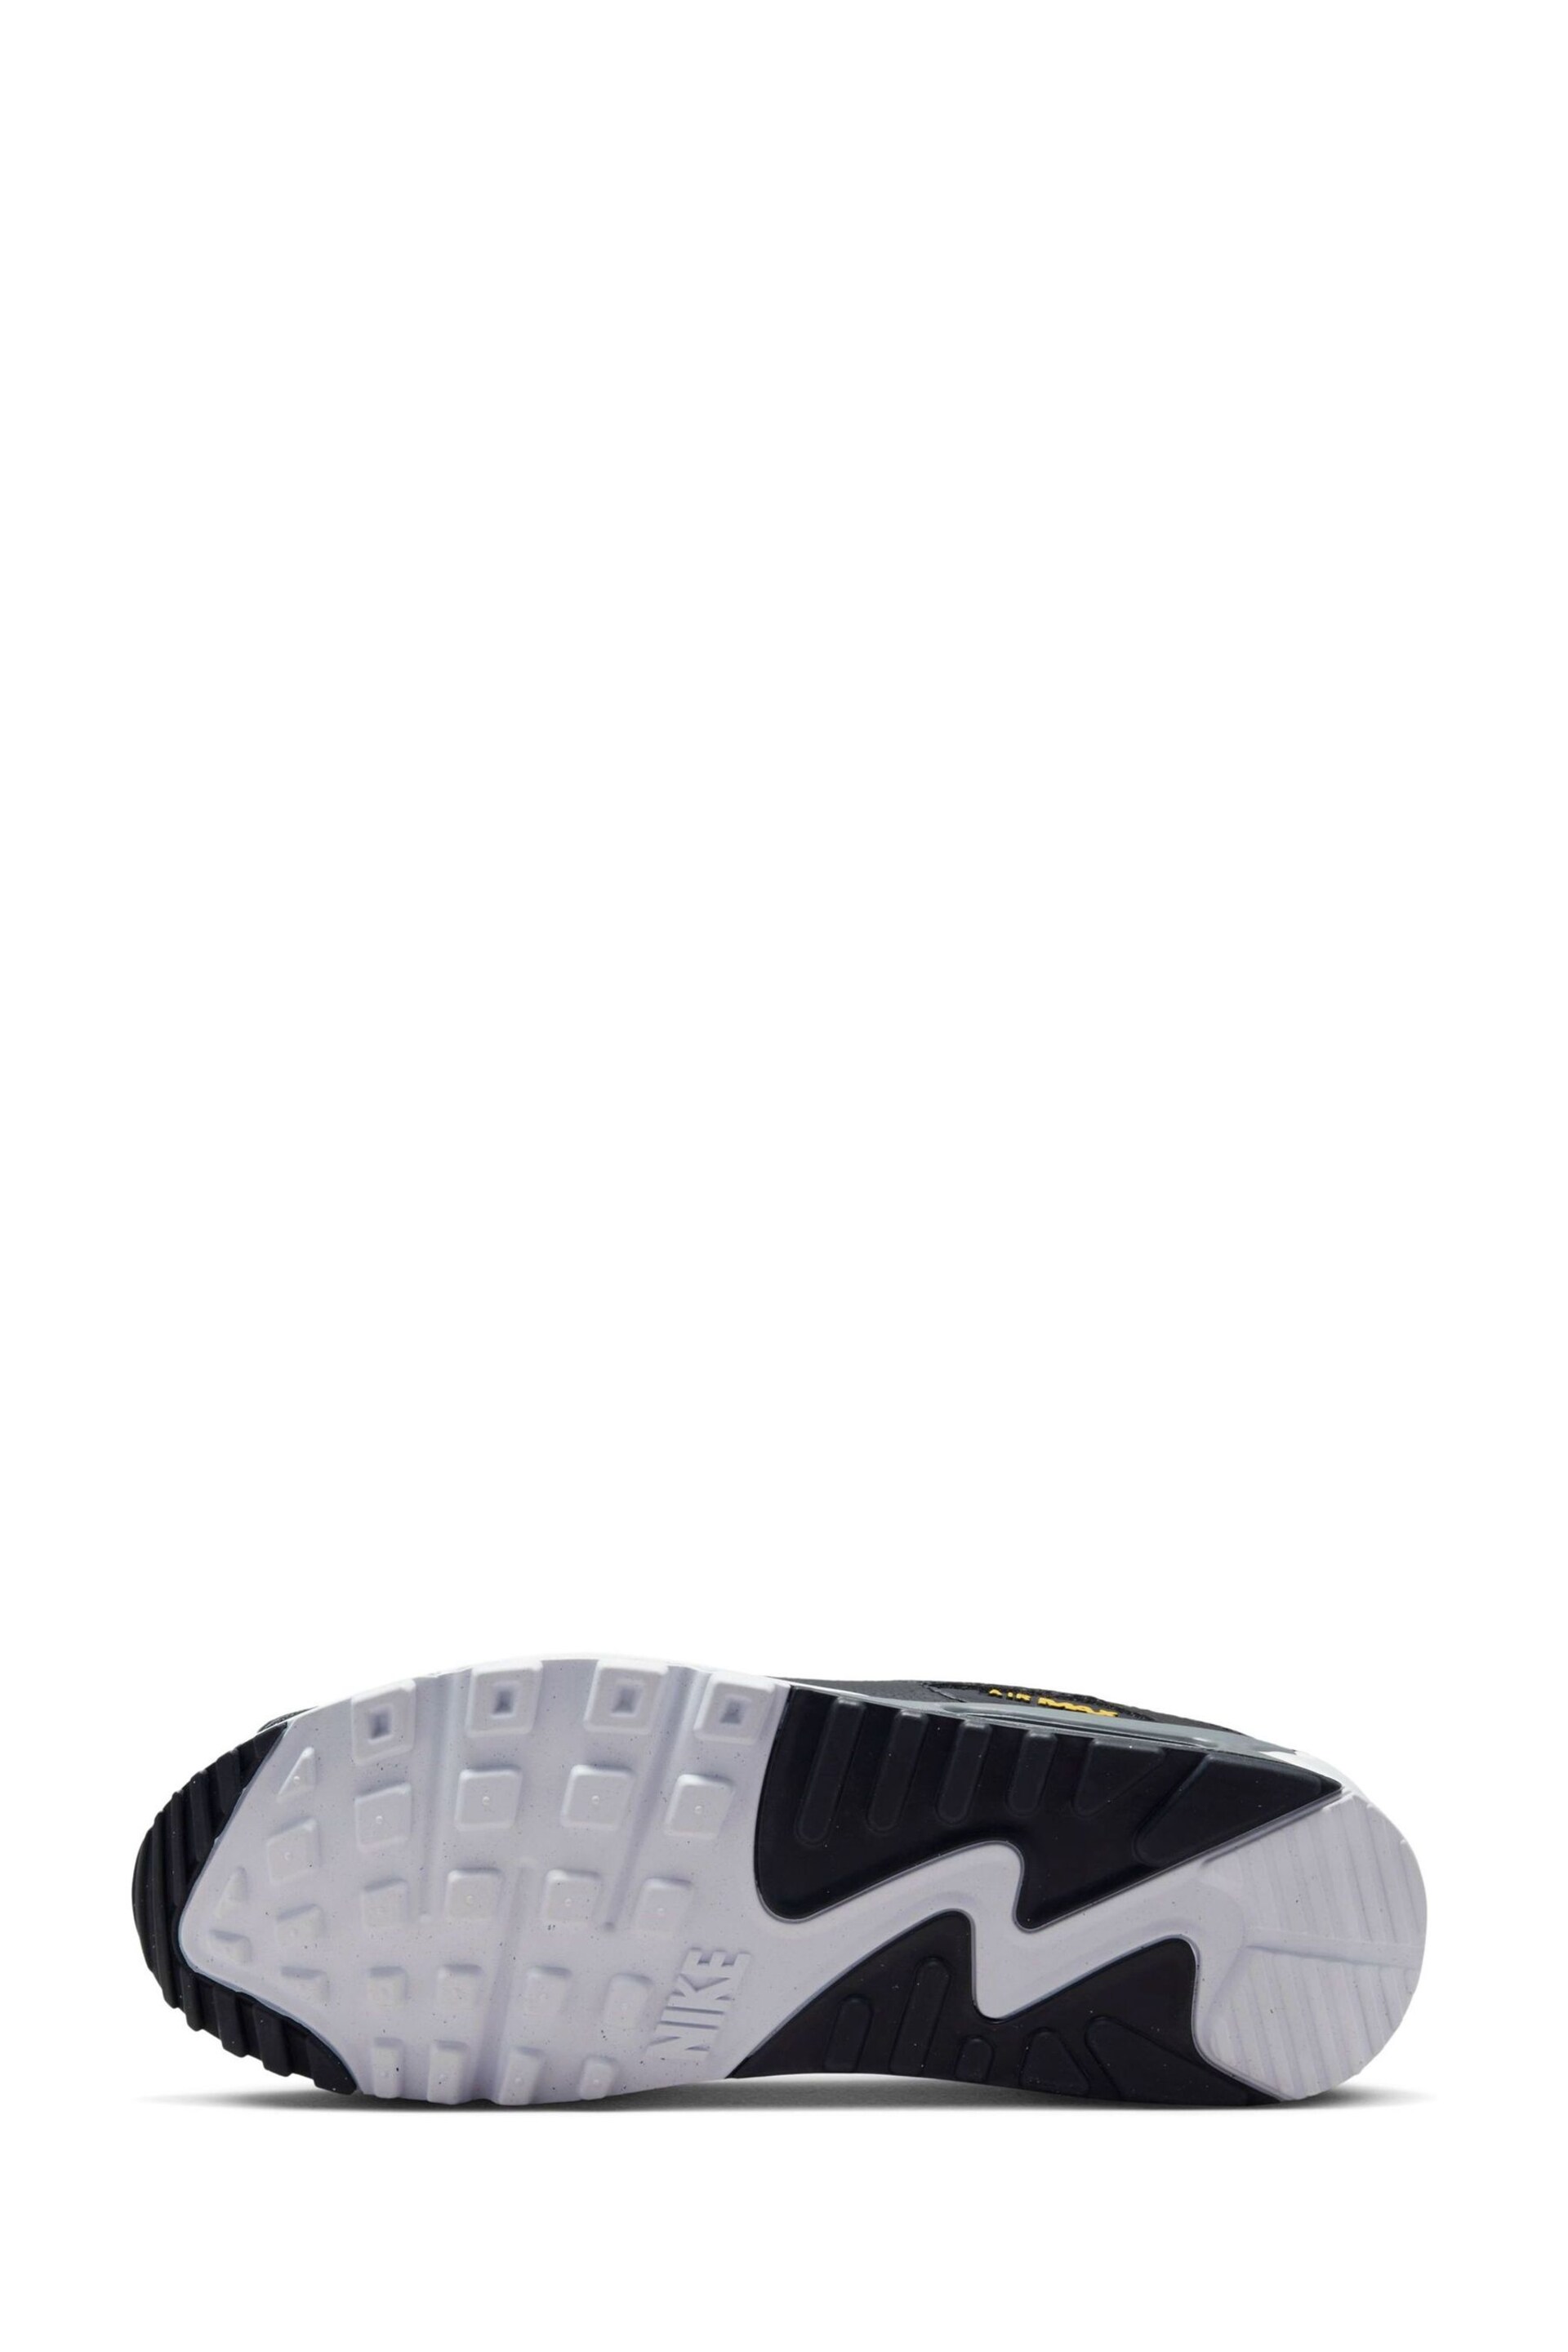 Nike Black/Gold Air Max 90 Trainers - Image 7 of 10